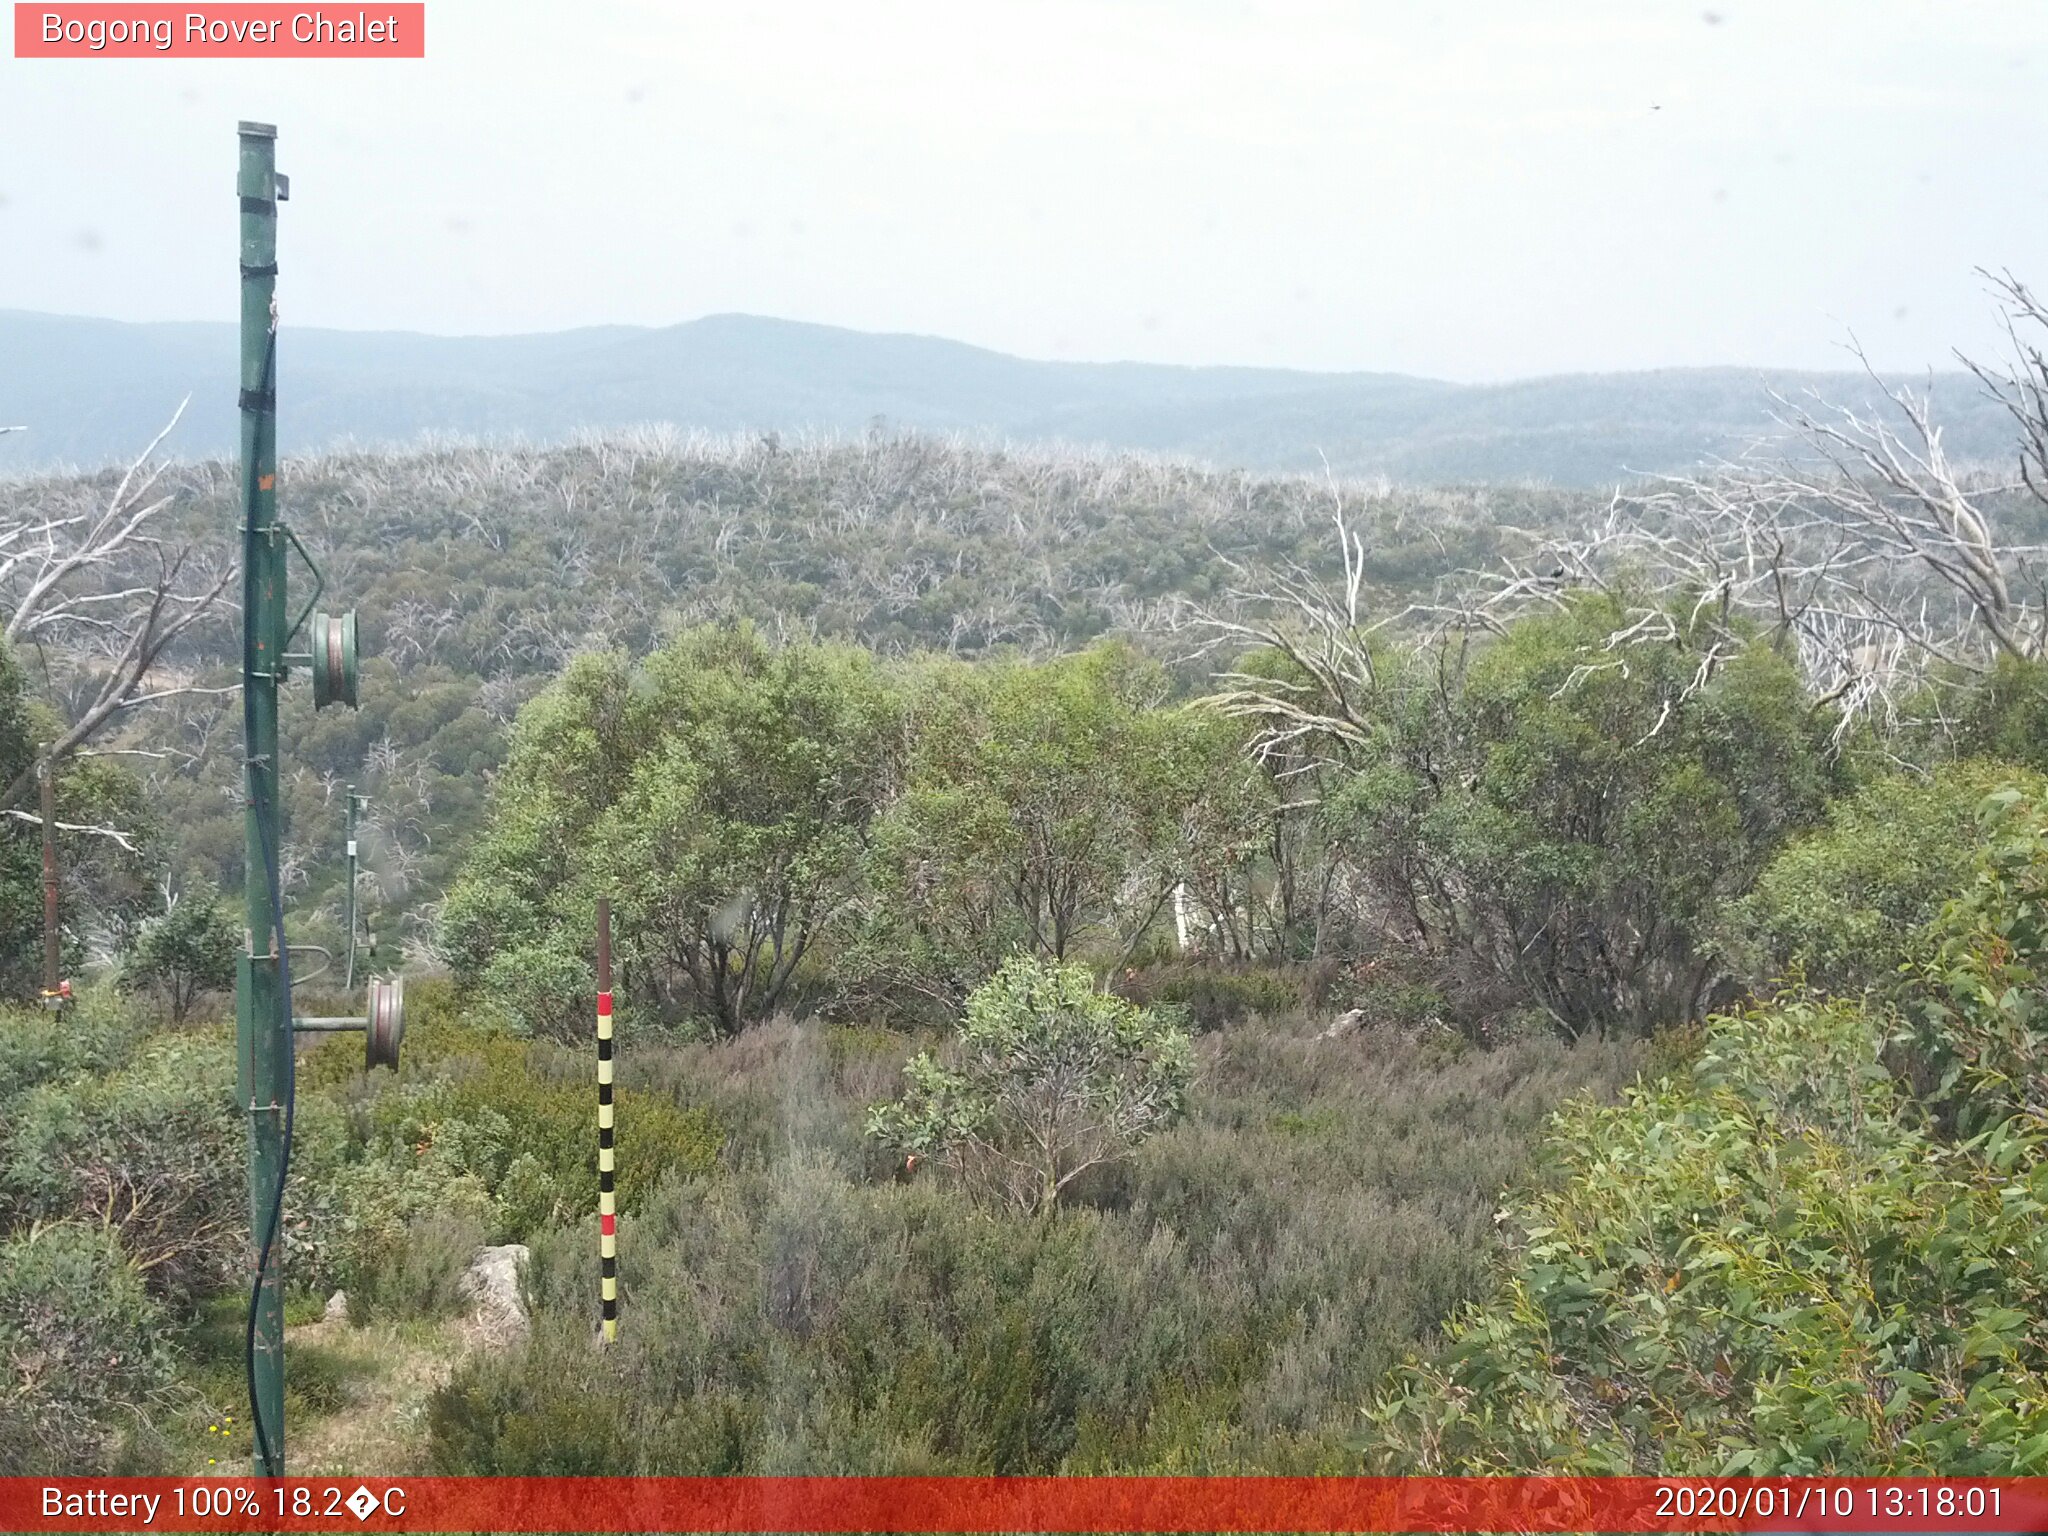 Bogong Web Cam 1:18pm Friday 10th of January 2020